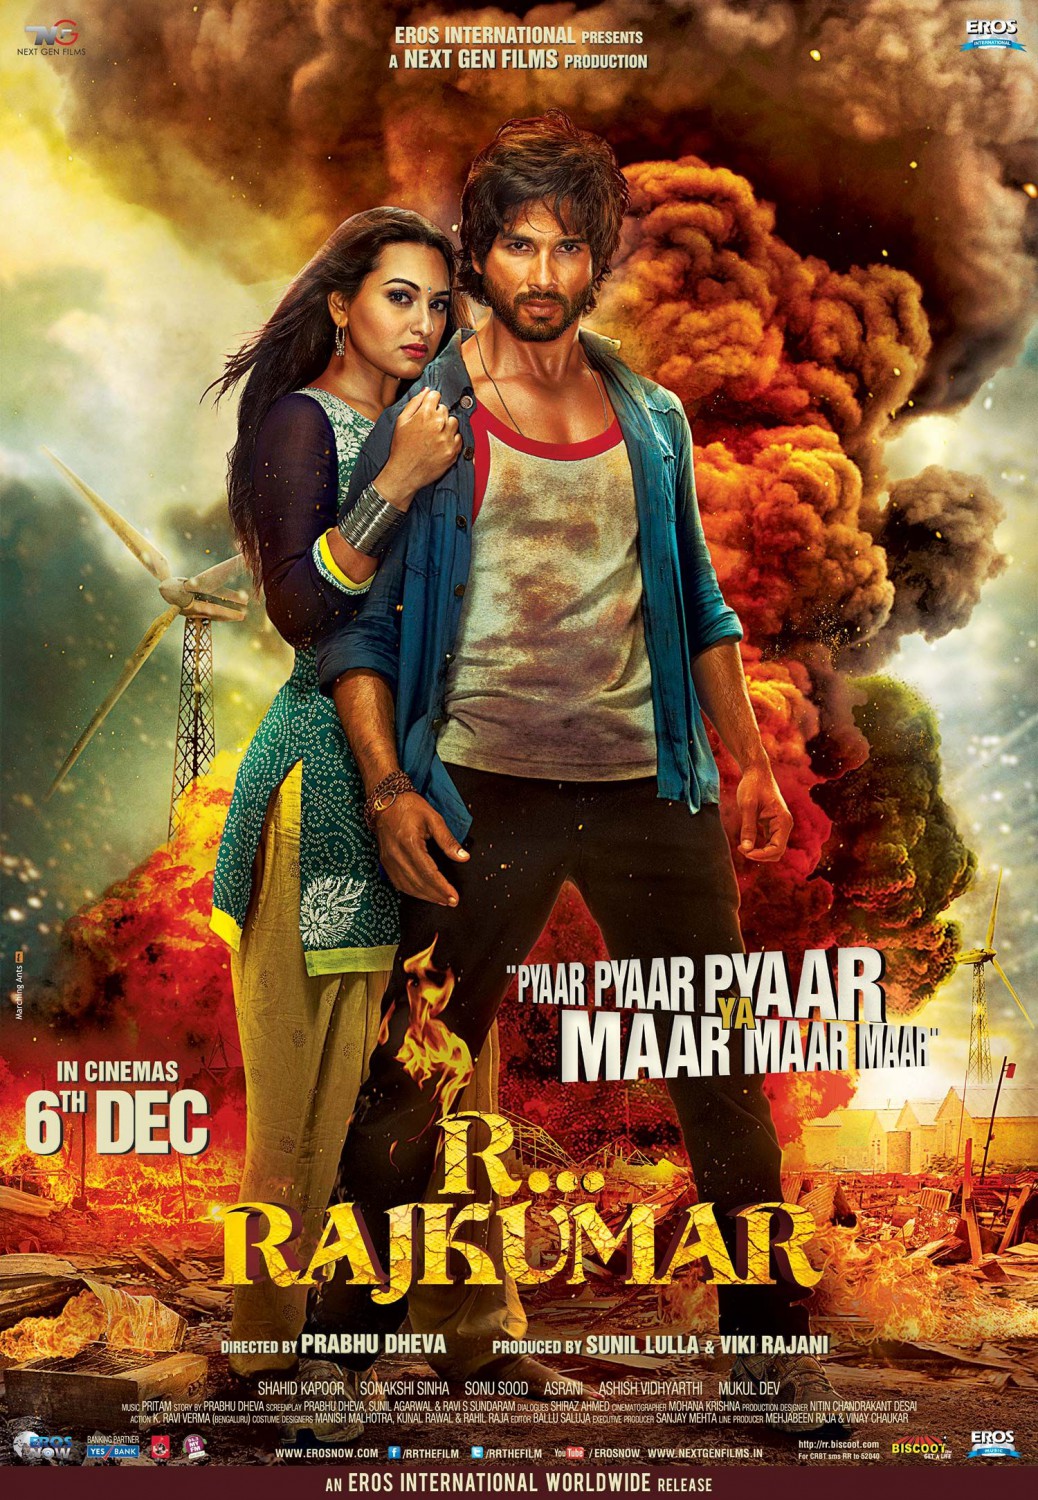 Extra Large Movie Poster Image for R... Rajkumar (#1 of 5)